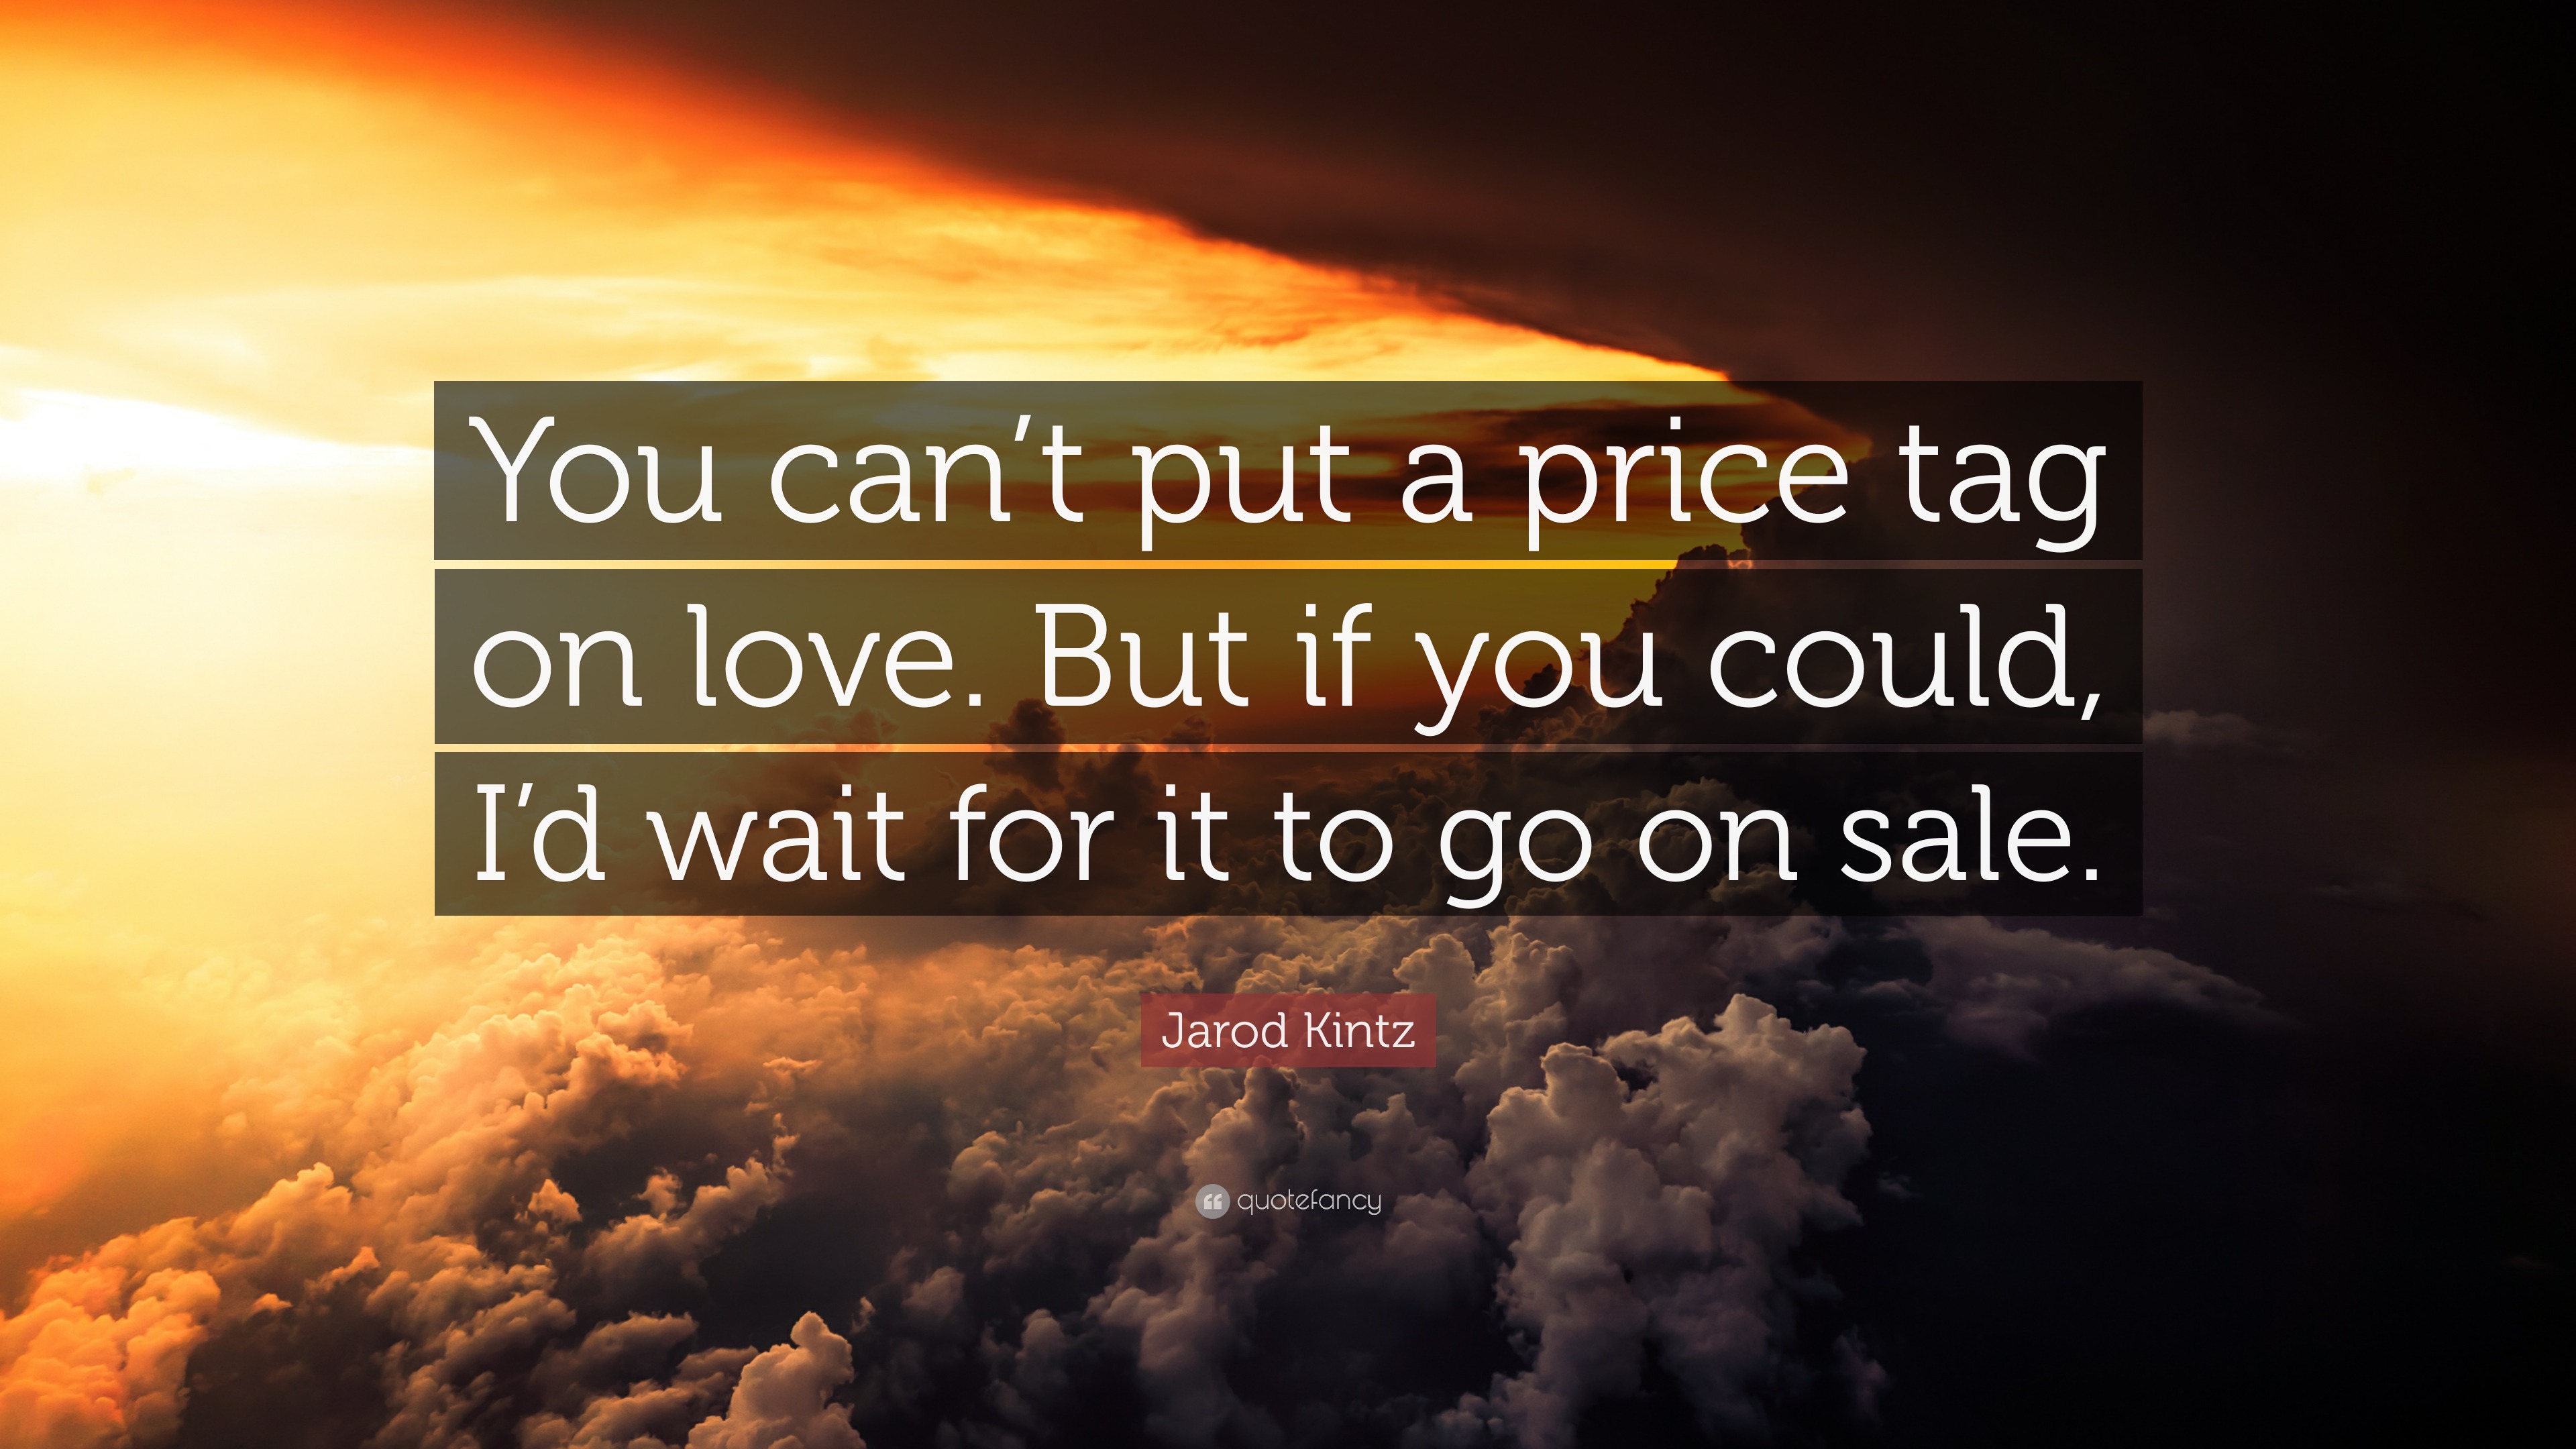 Jarod Kintz Quote “You can t put a price tag on love